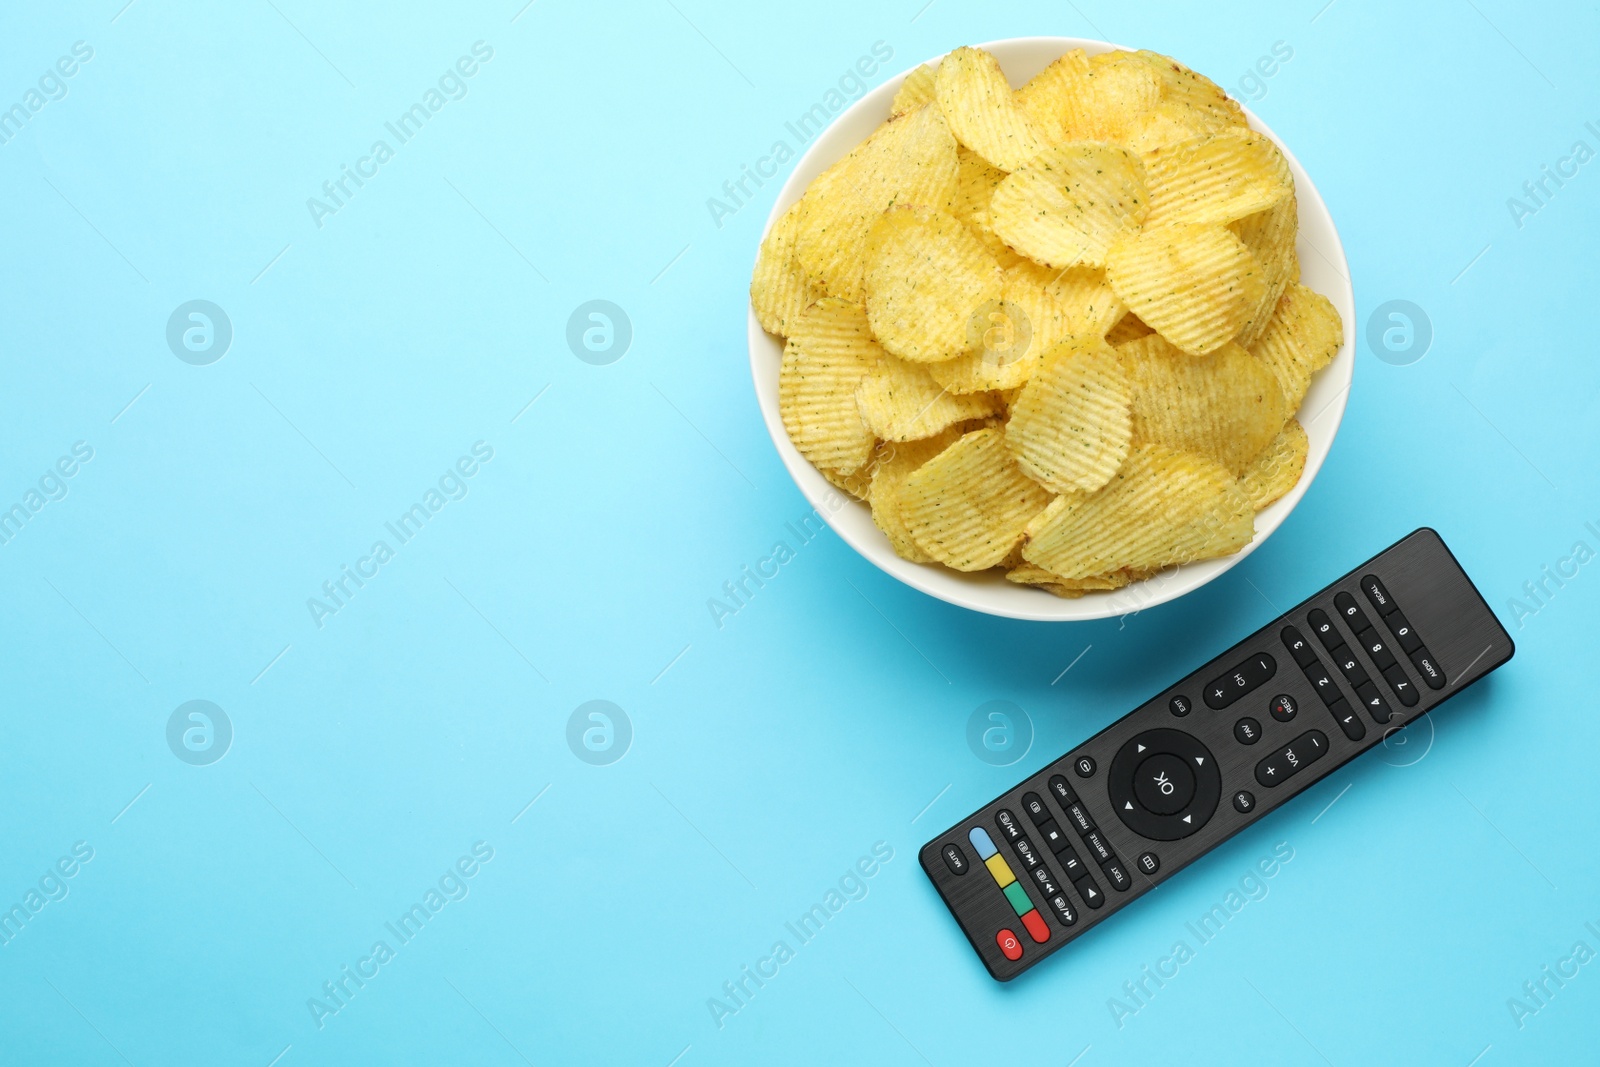 Photo of Remote control and bowl of potato chips on light blue background, flat lay. Space for text